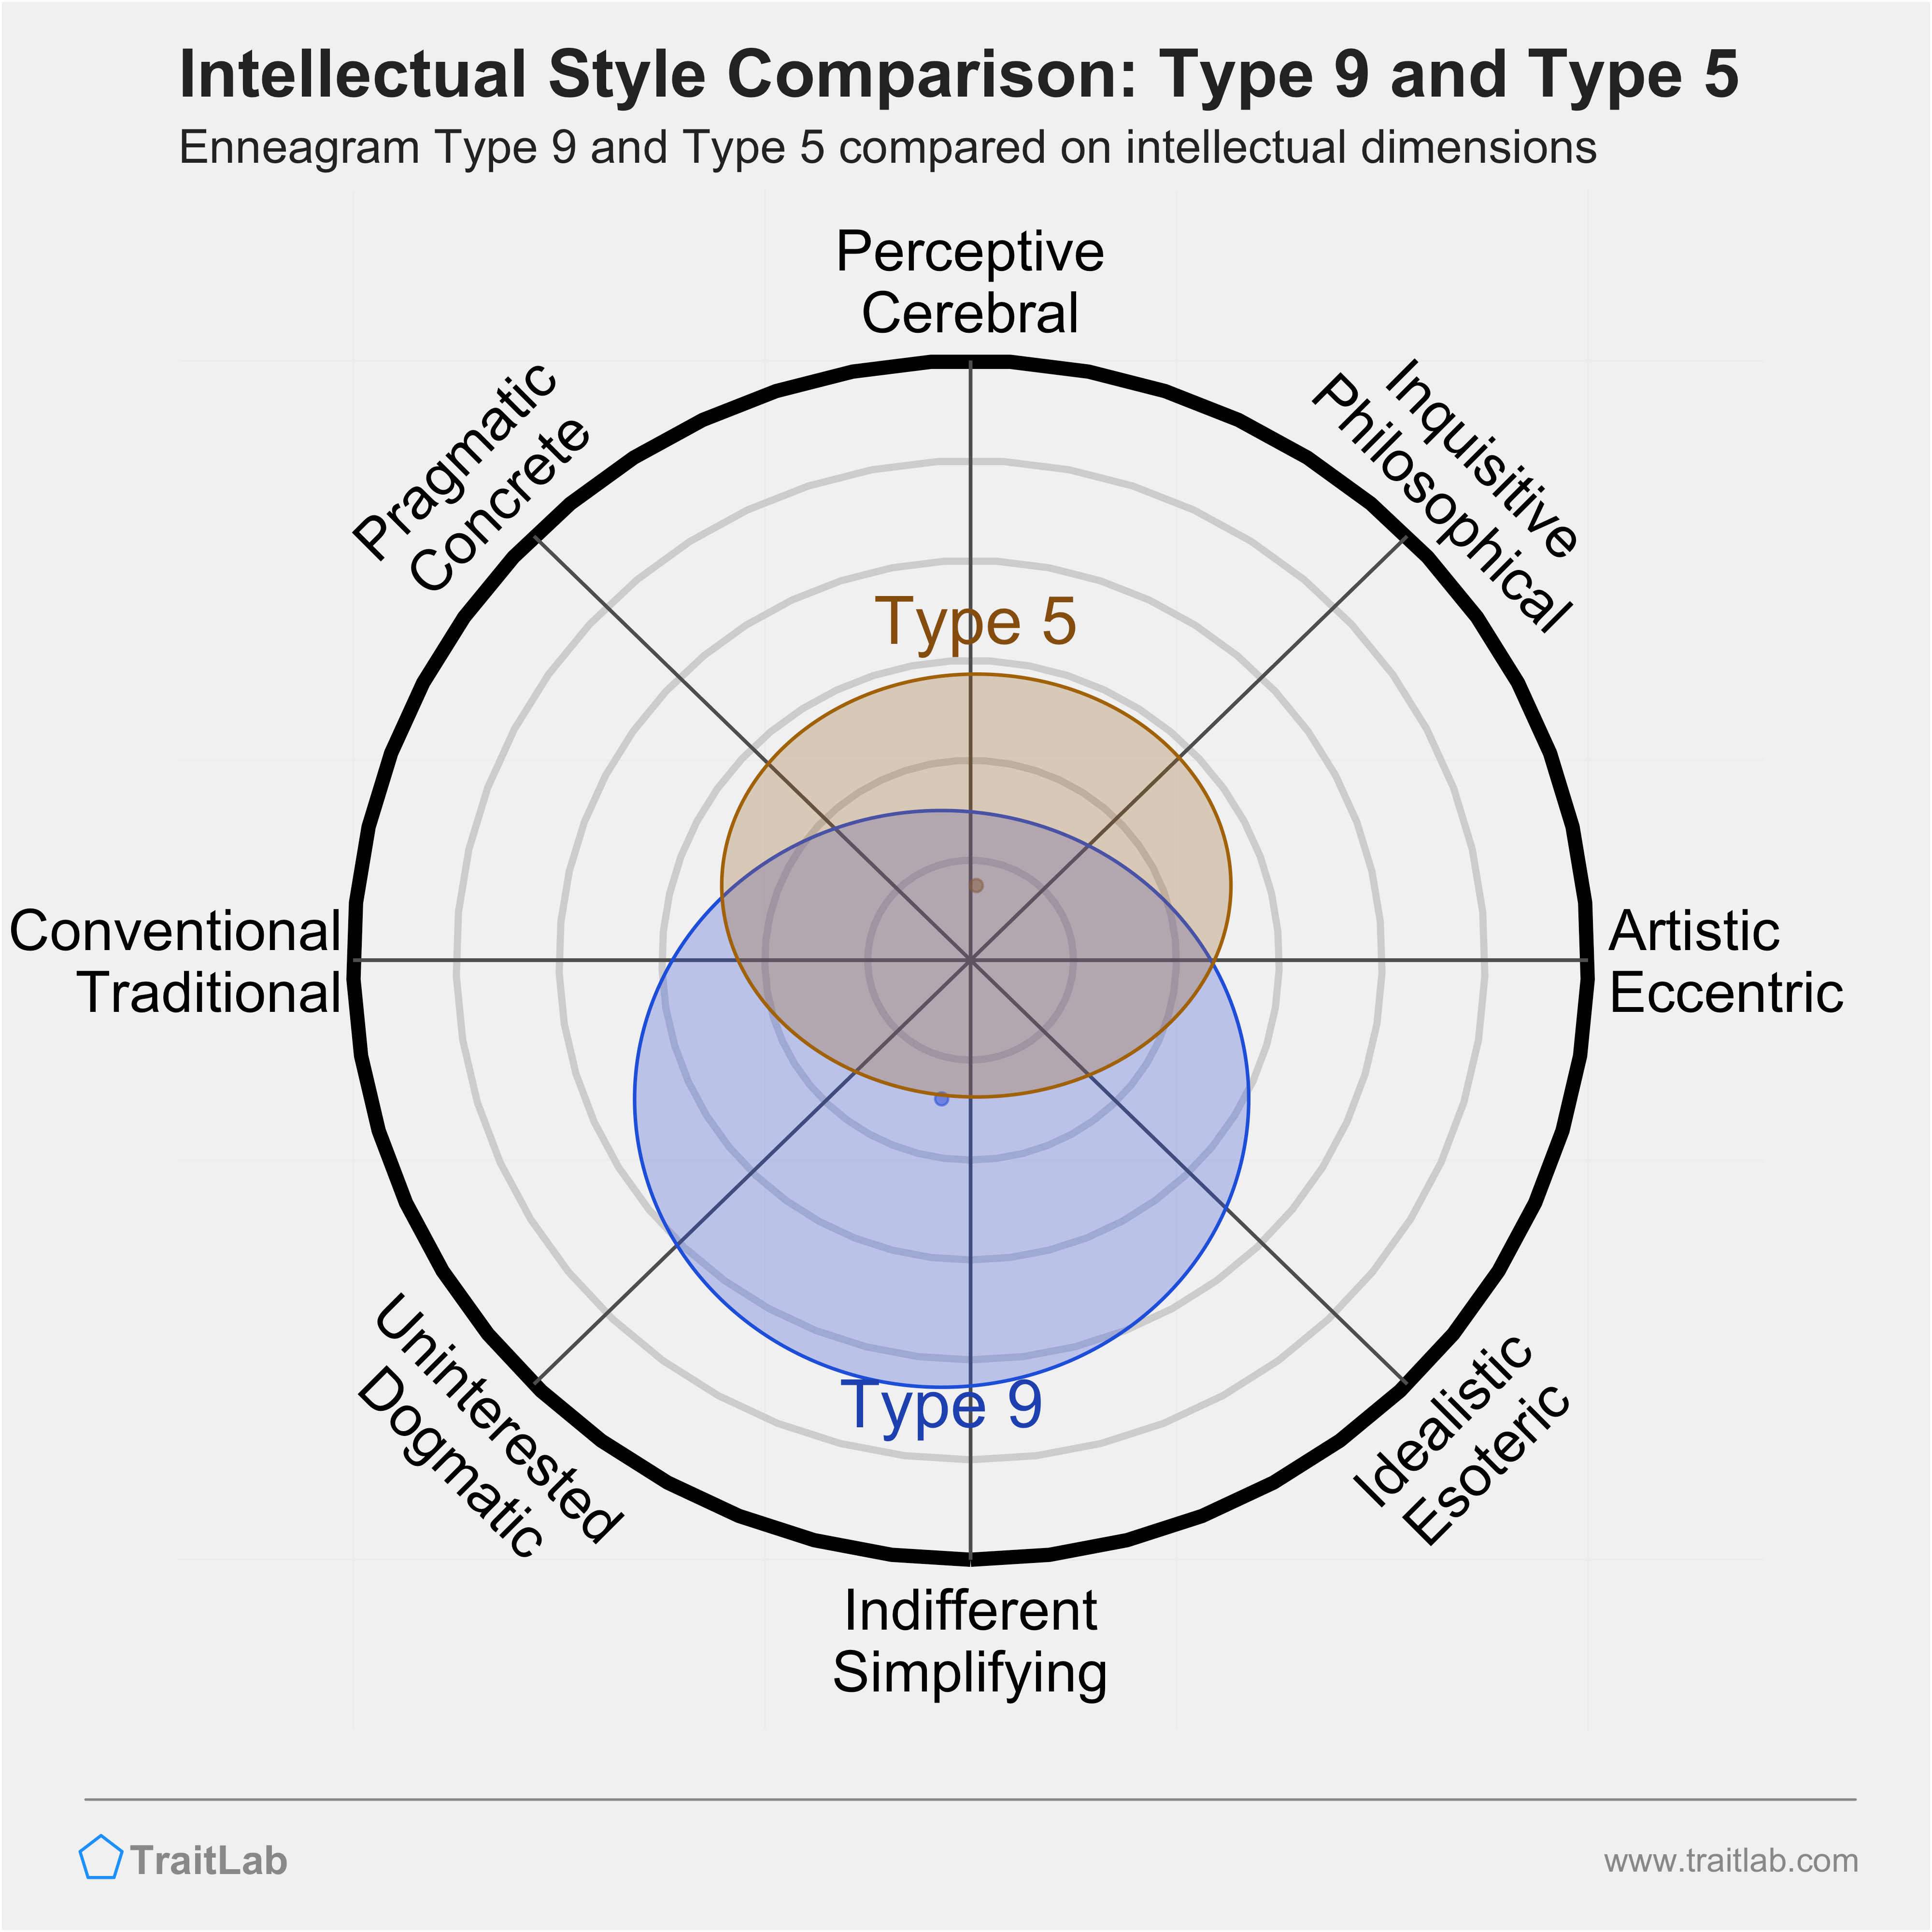 Type 9 and Type 5 comparison across intellectual dimensions